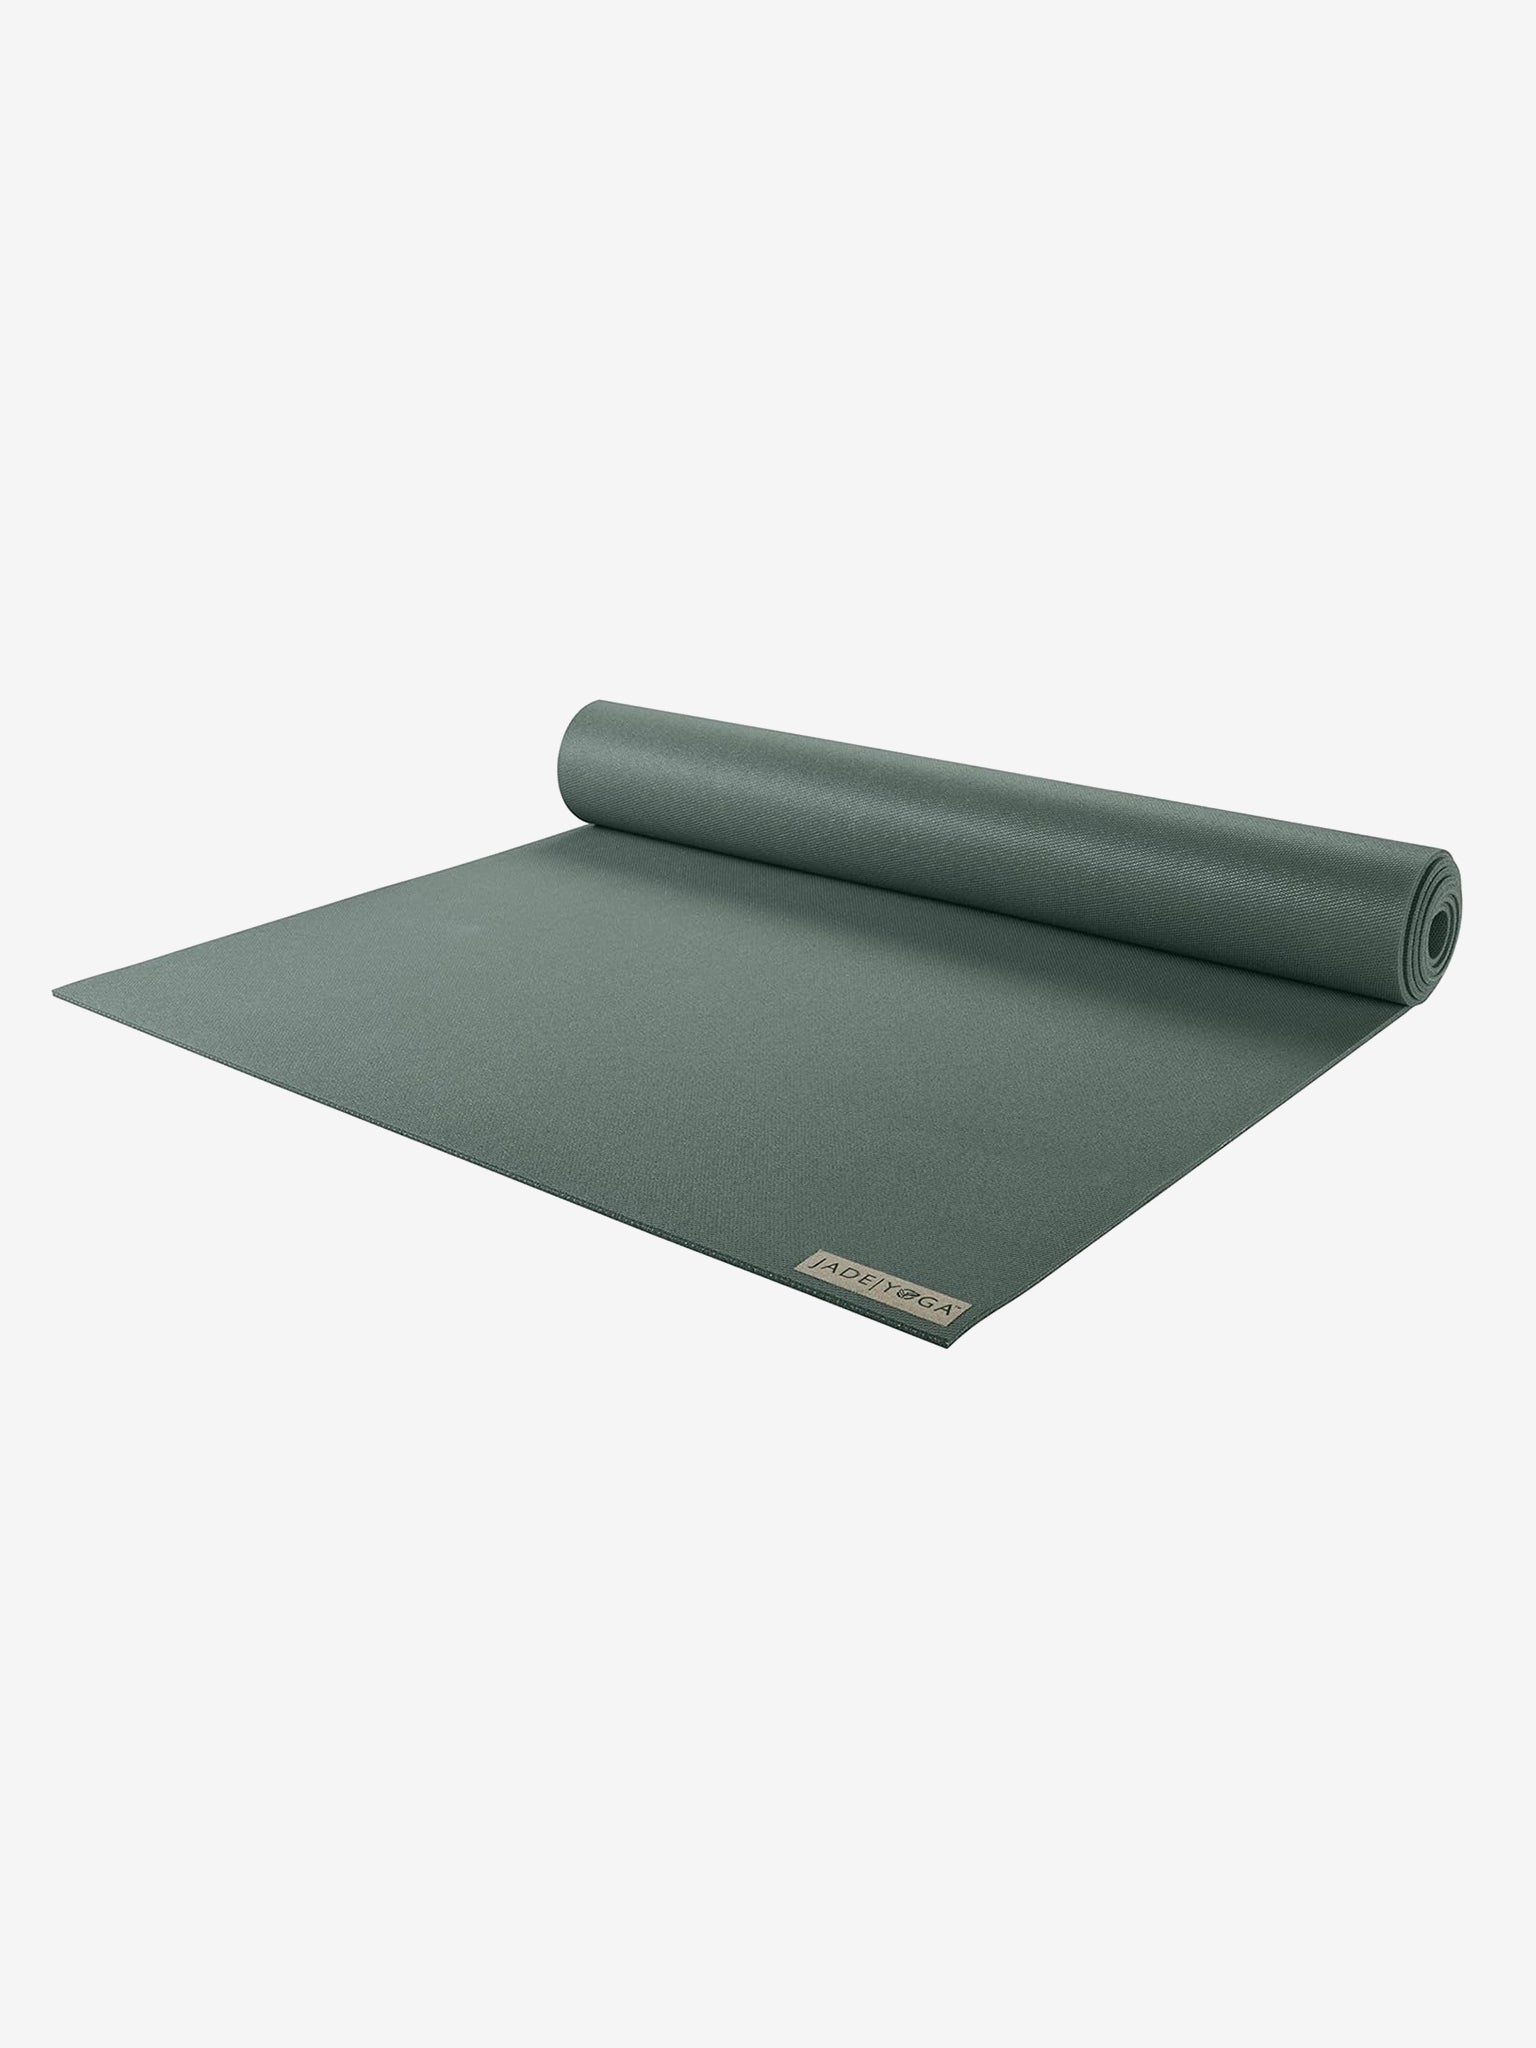 Green Jade Harmony yoga mat by Manduka, rolled halfway, front view on white background